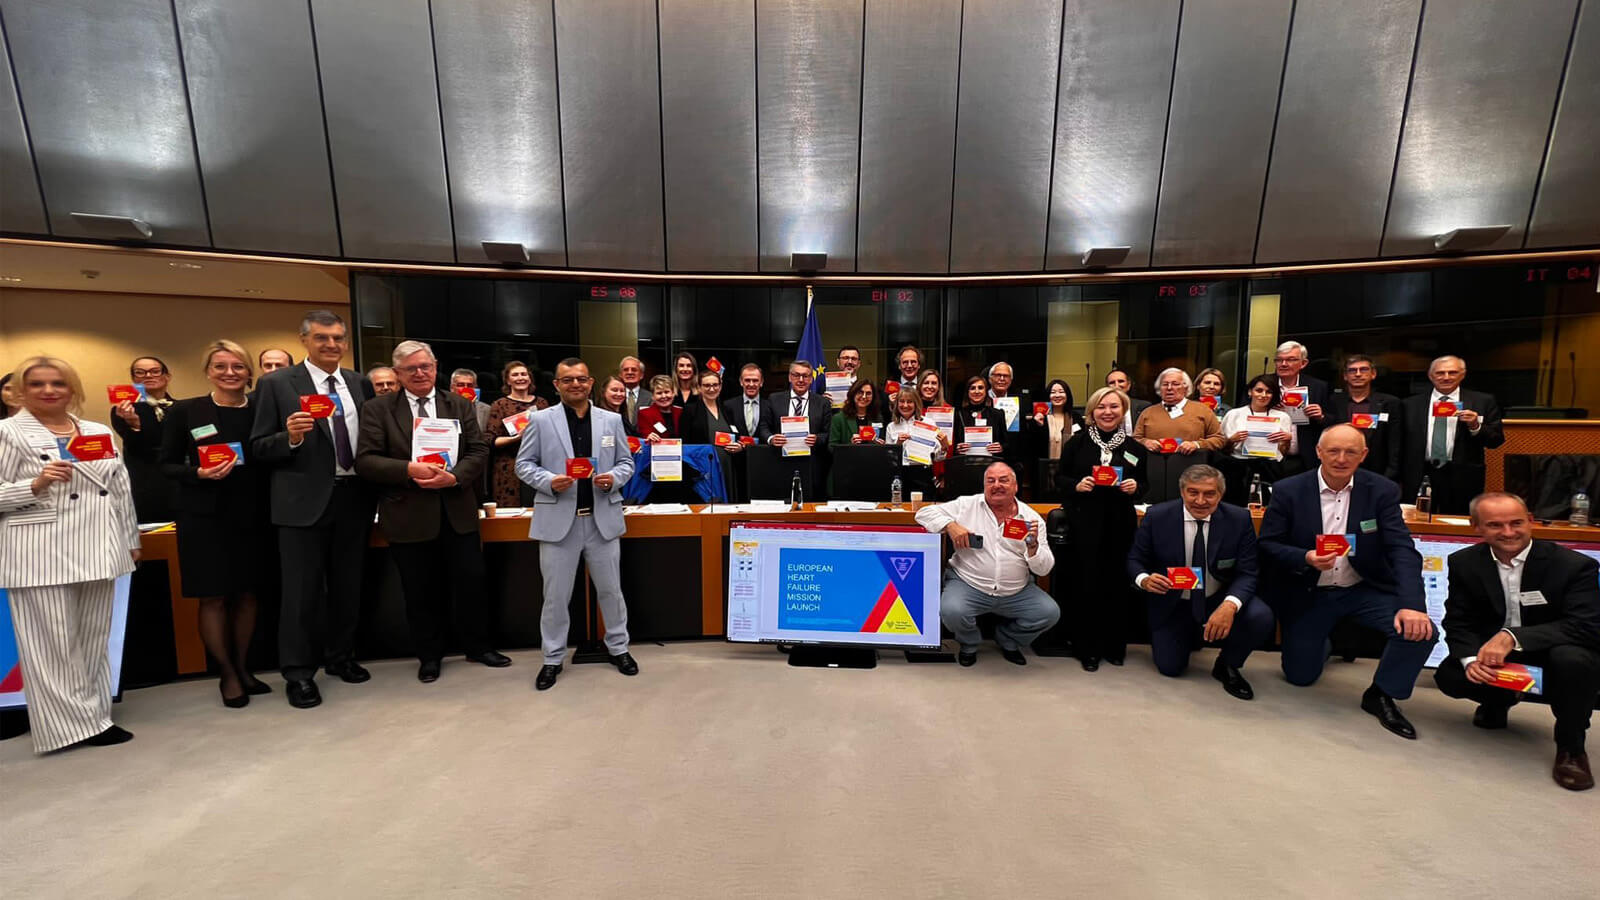 European Heart Failure Mission Statement launched at Europea